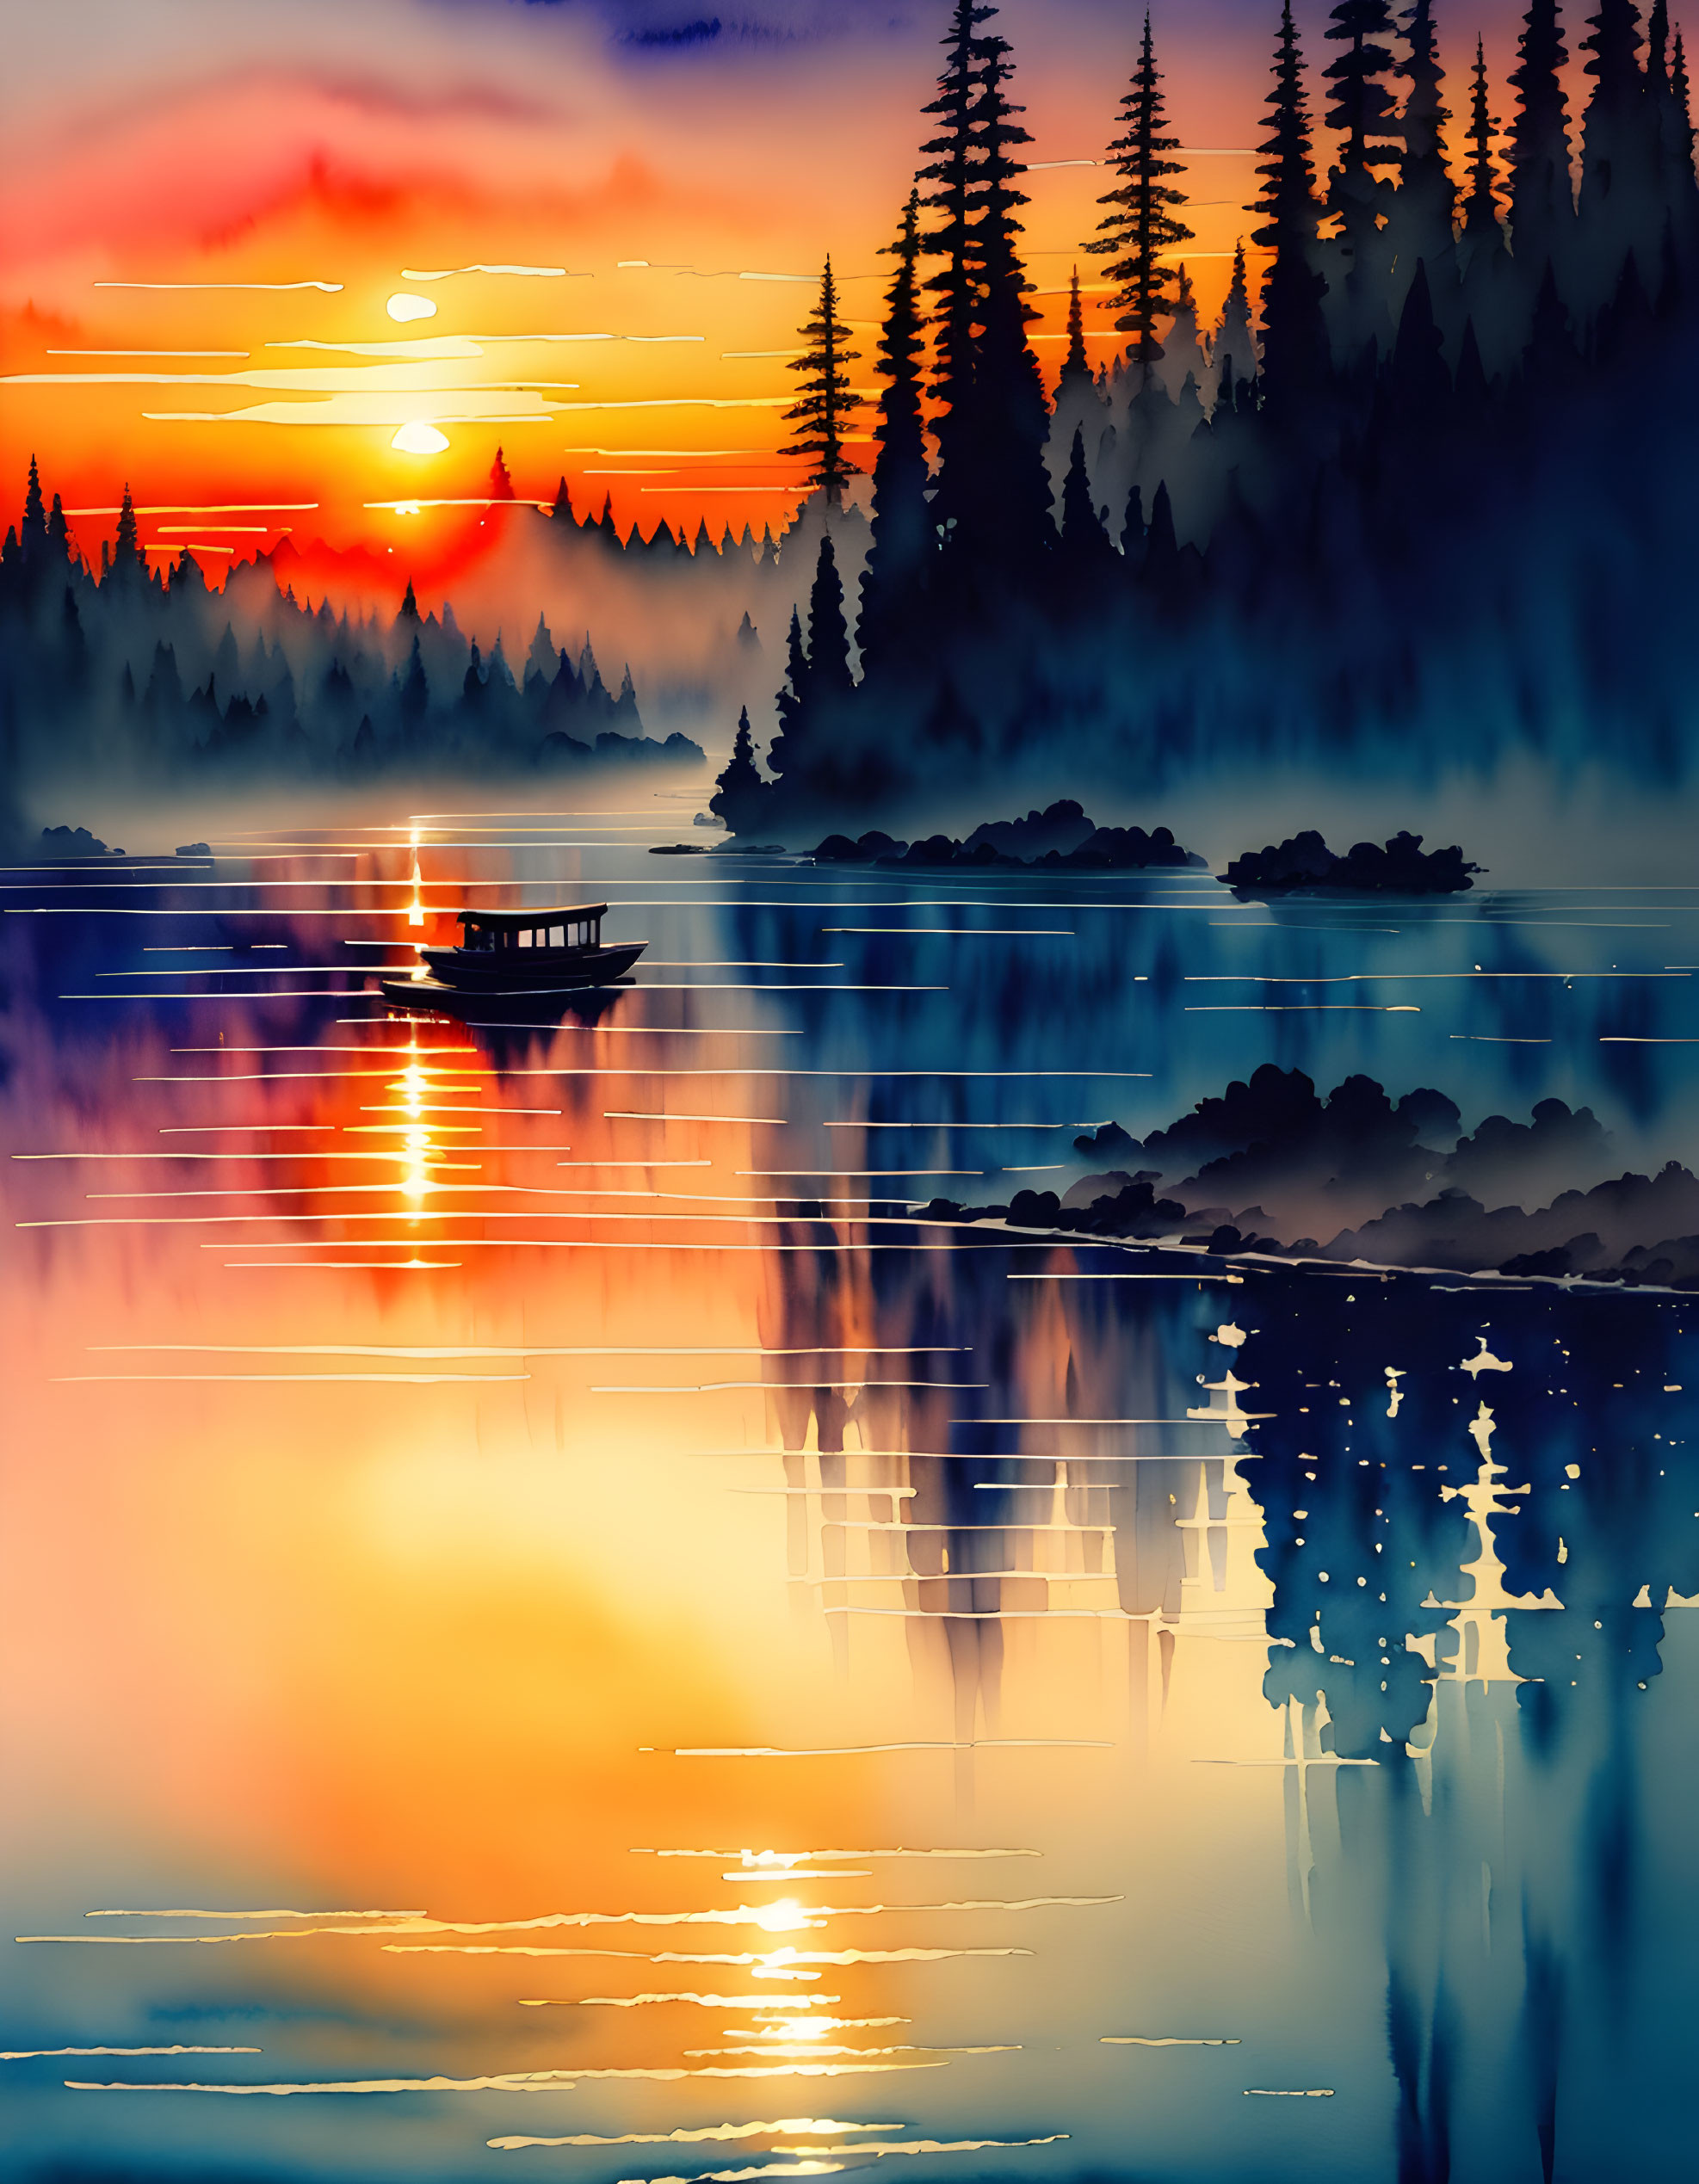 Tranquil sunset lake scene with vibrant colors, silhouetted trees, and a small boat